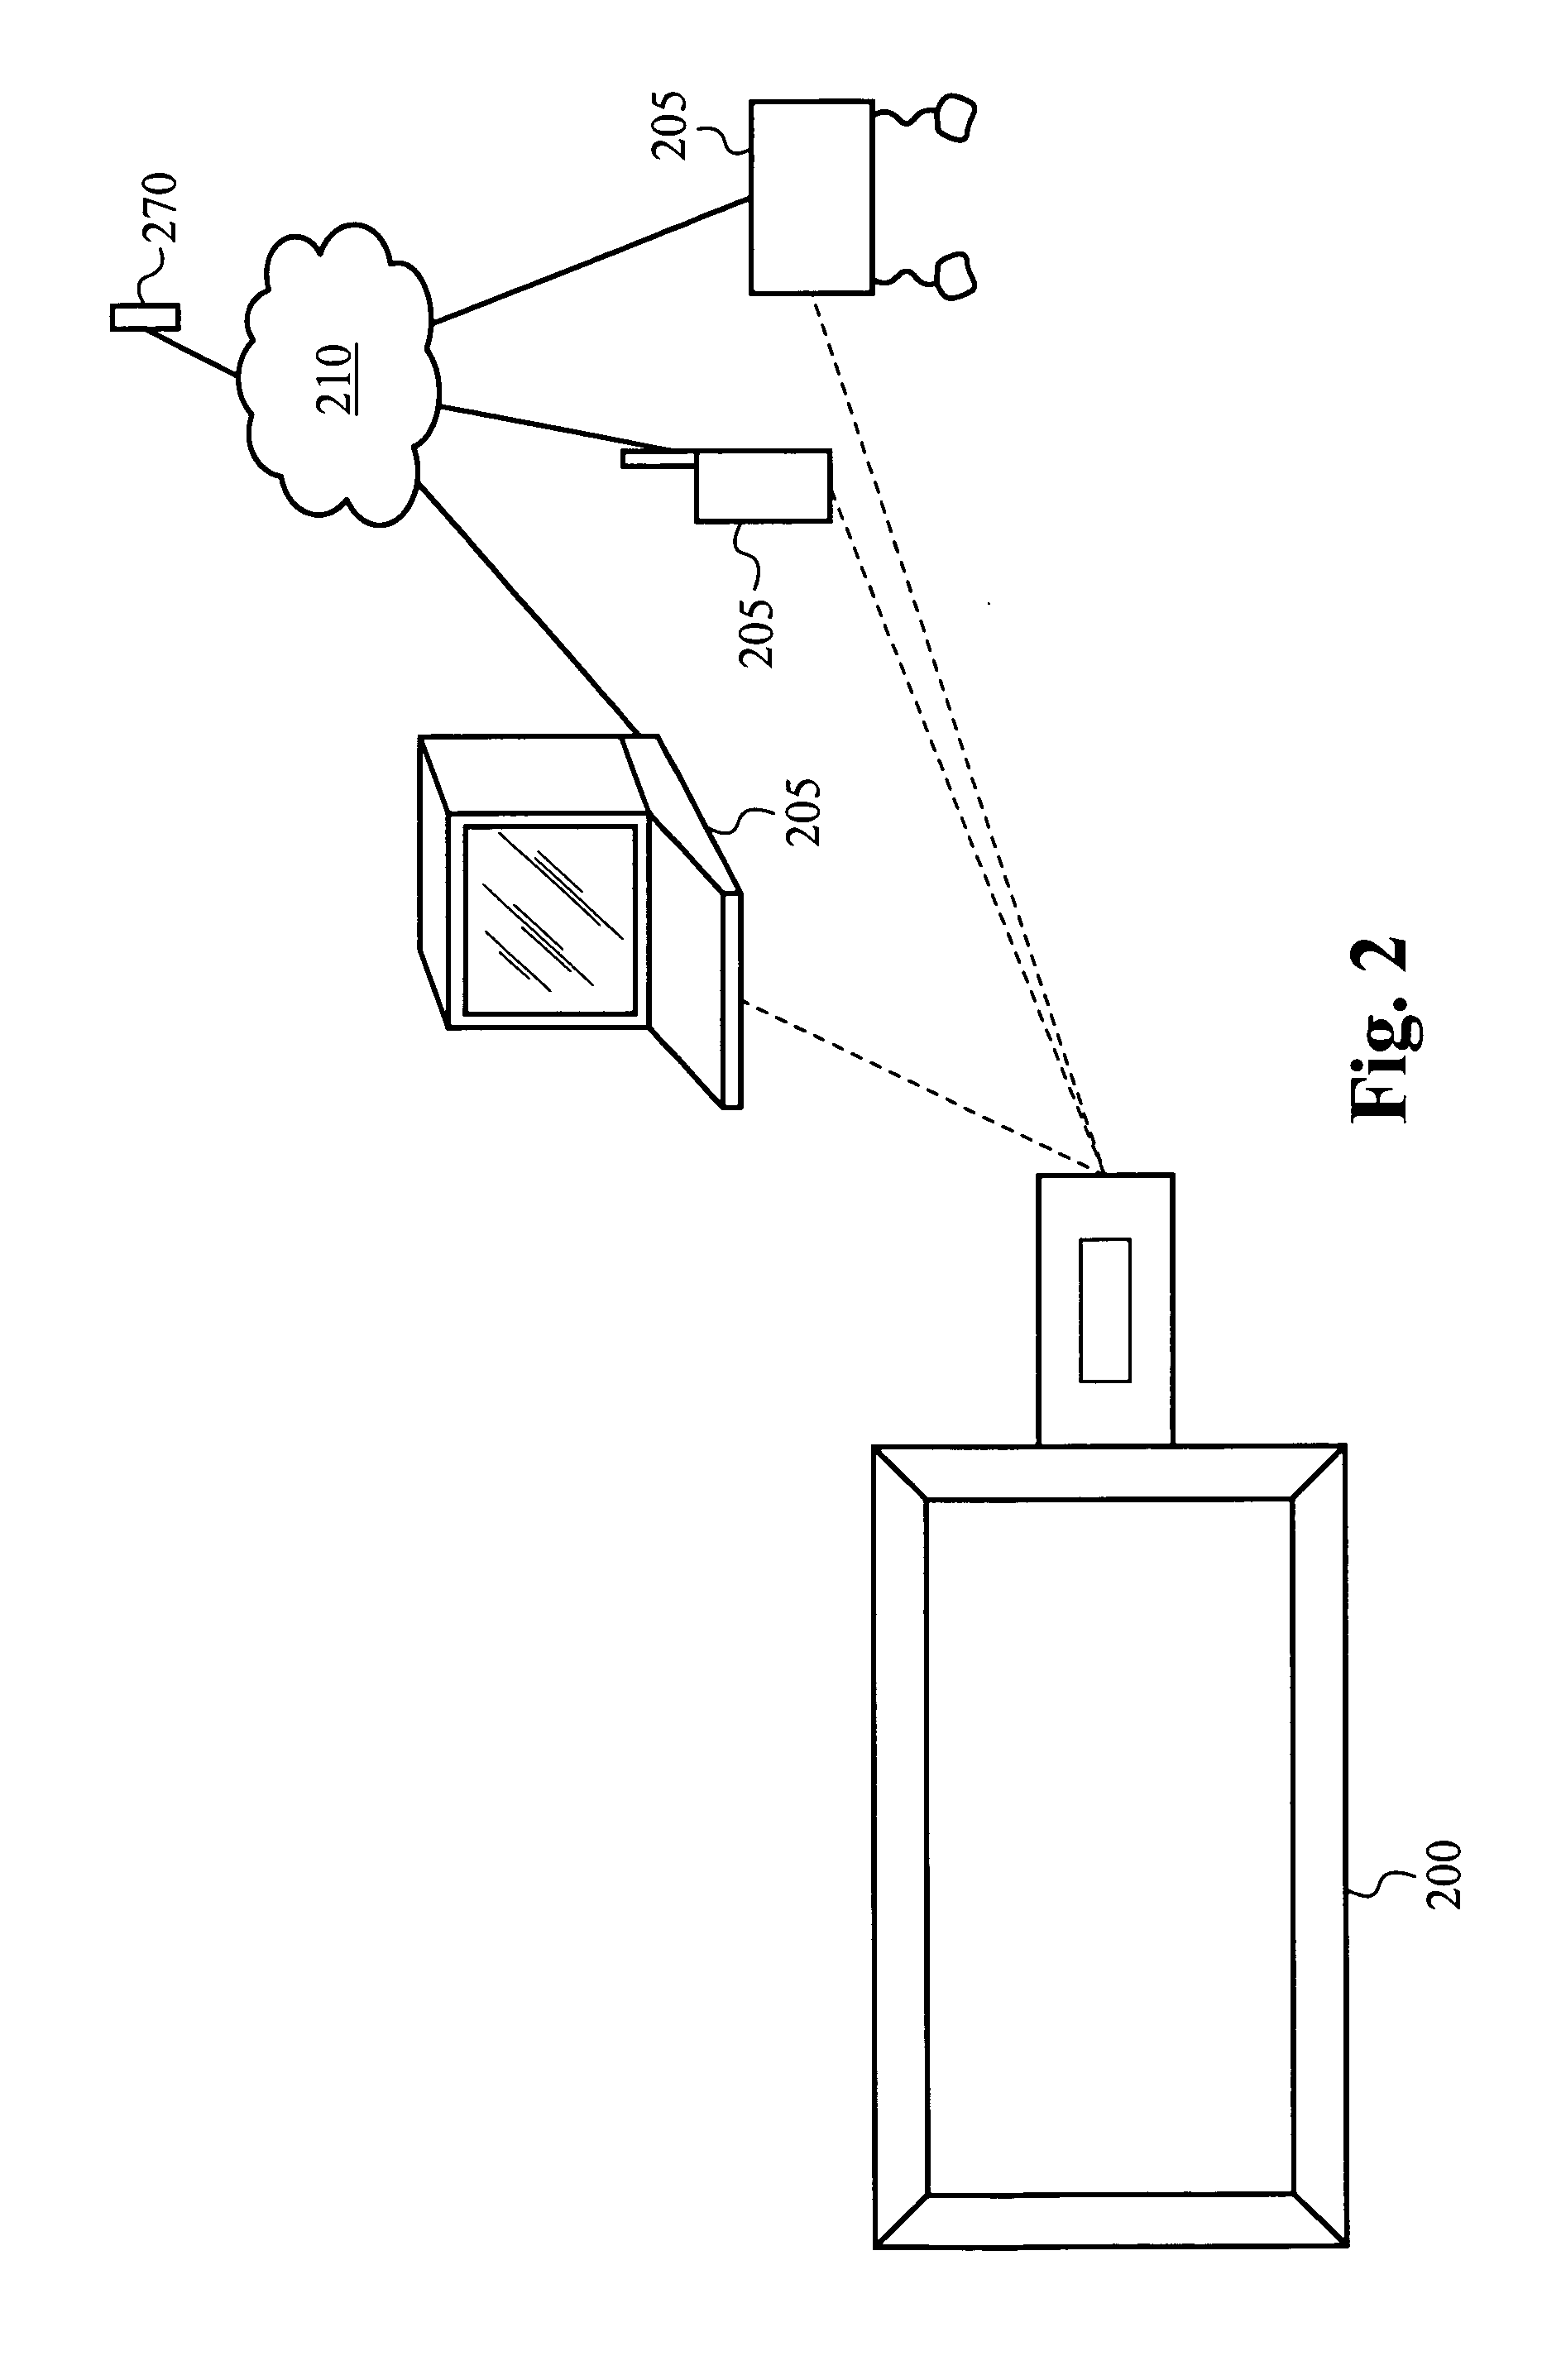 Method and apparatus for providing games and content